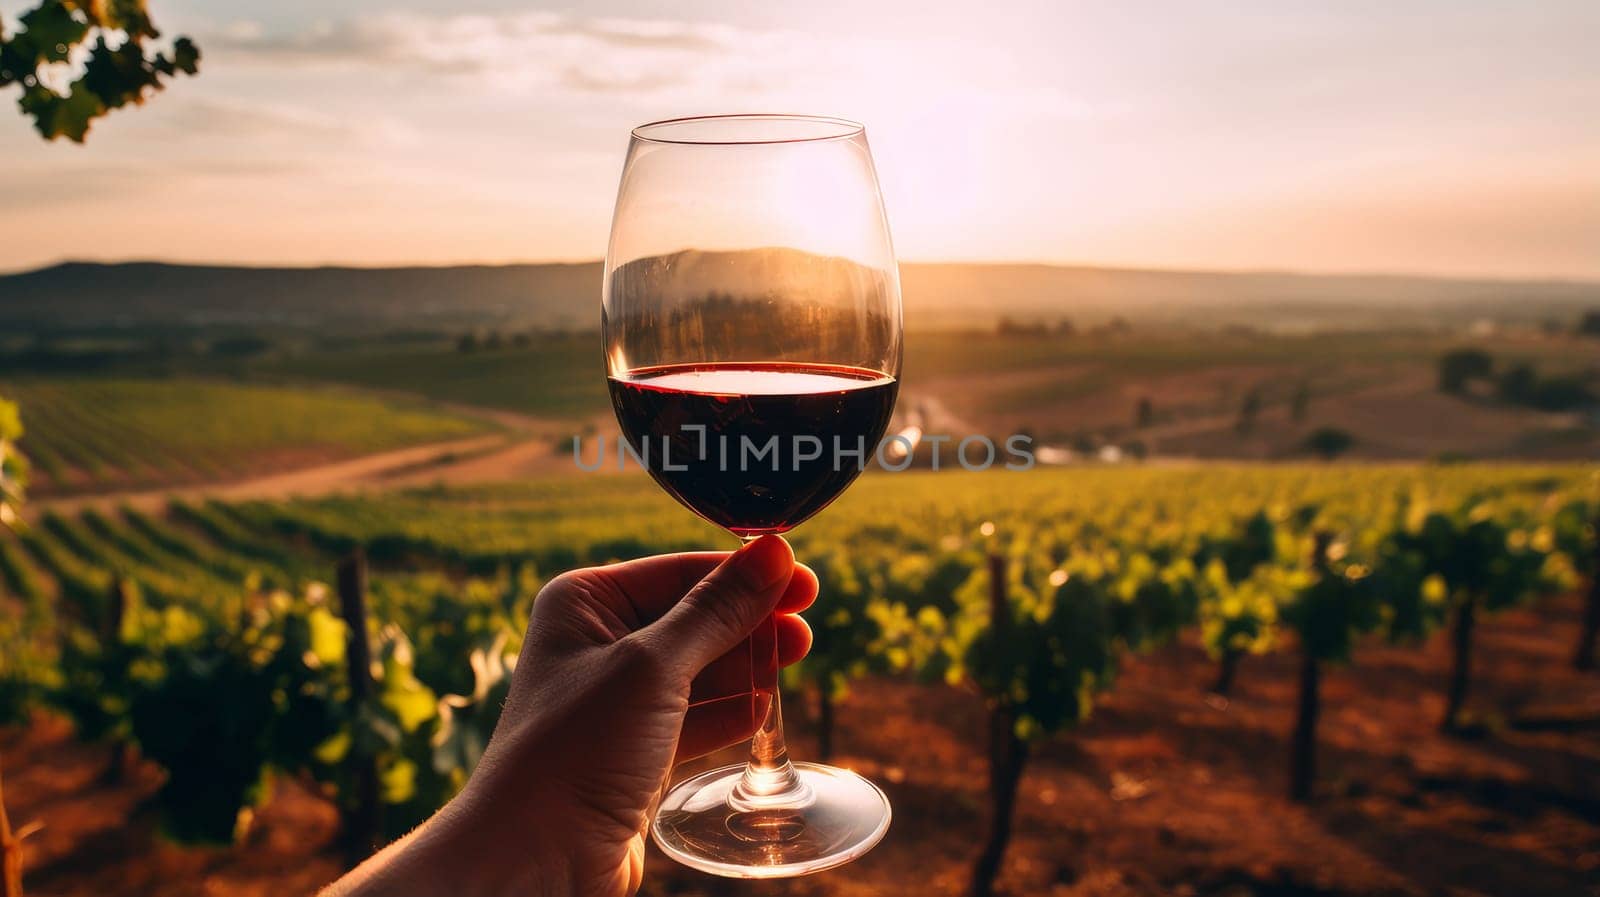 Red wine swirls in a glass. A bush of grapes before harvest. A hand holds a glass of white wine against a vineyard in the background of a rural landscape during sunset. by Alla_Yurtayeva